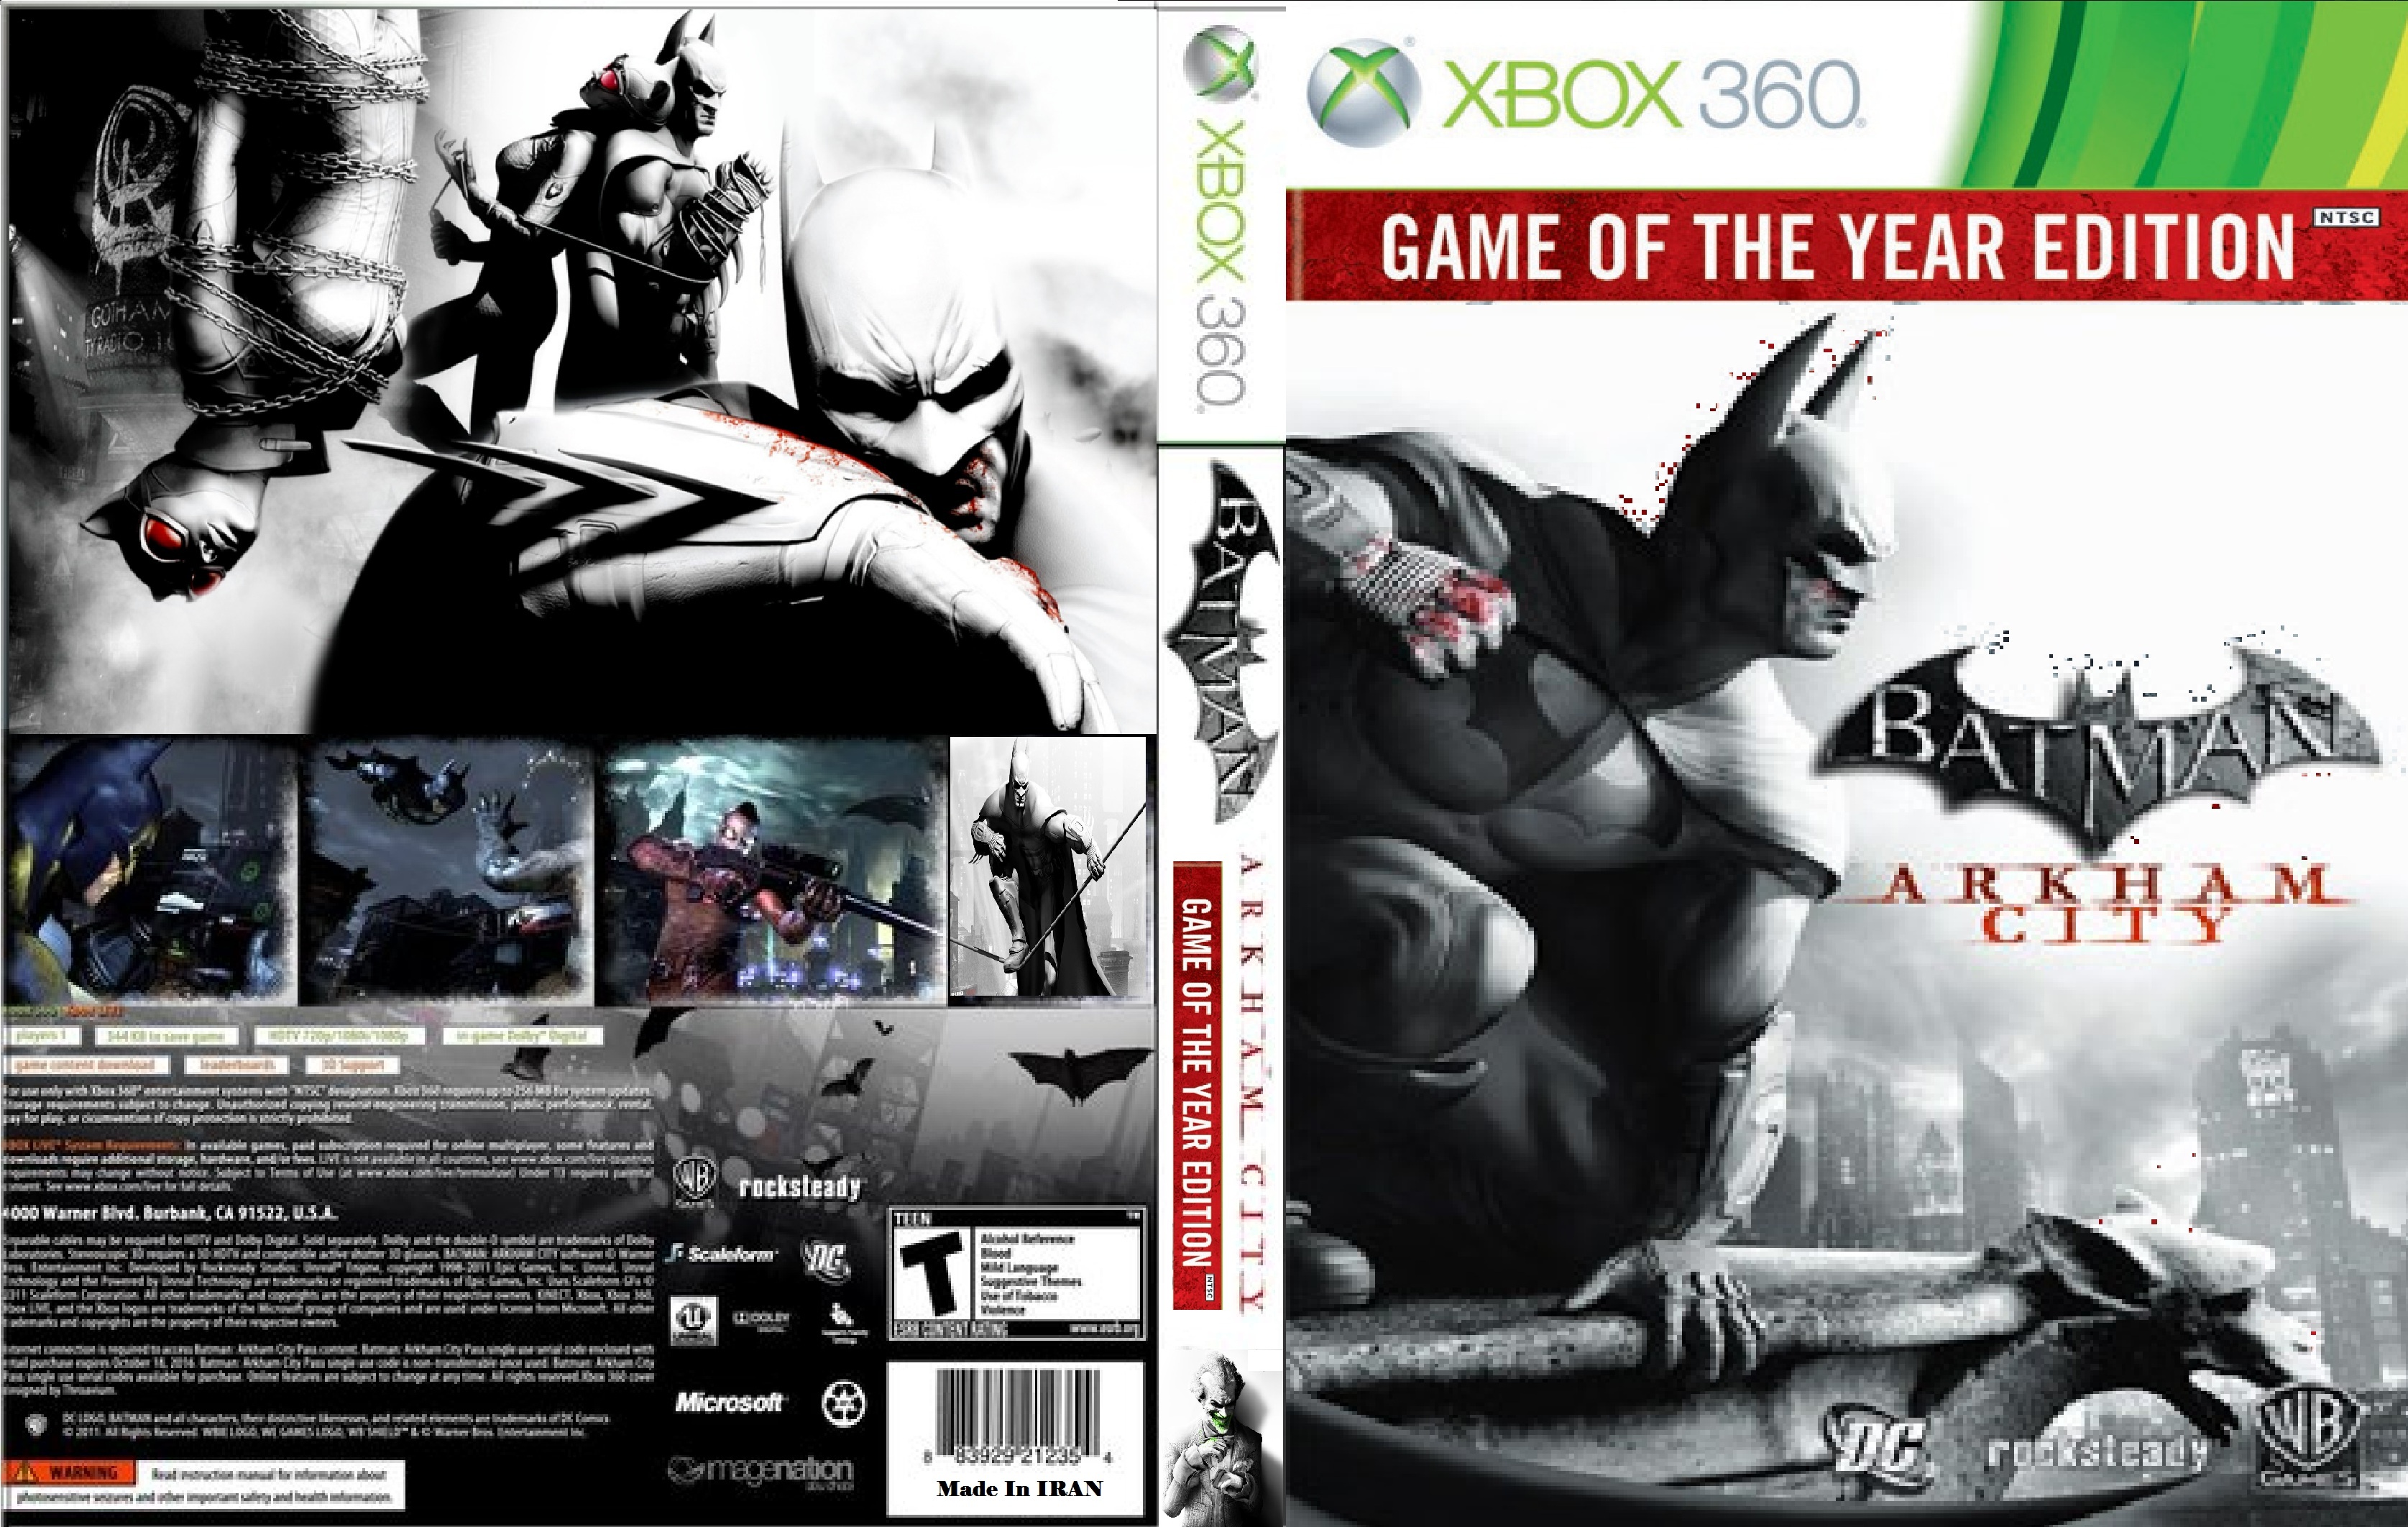 Viewing full size Batman Arkham City Game of the year Edition box cover